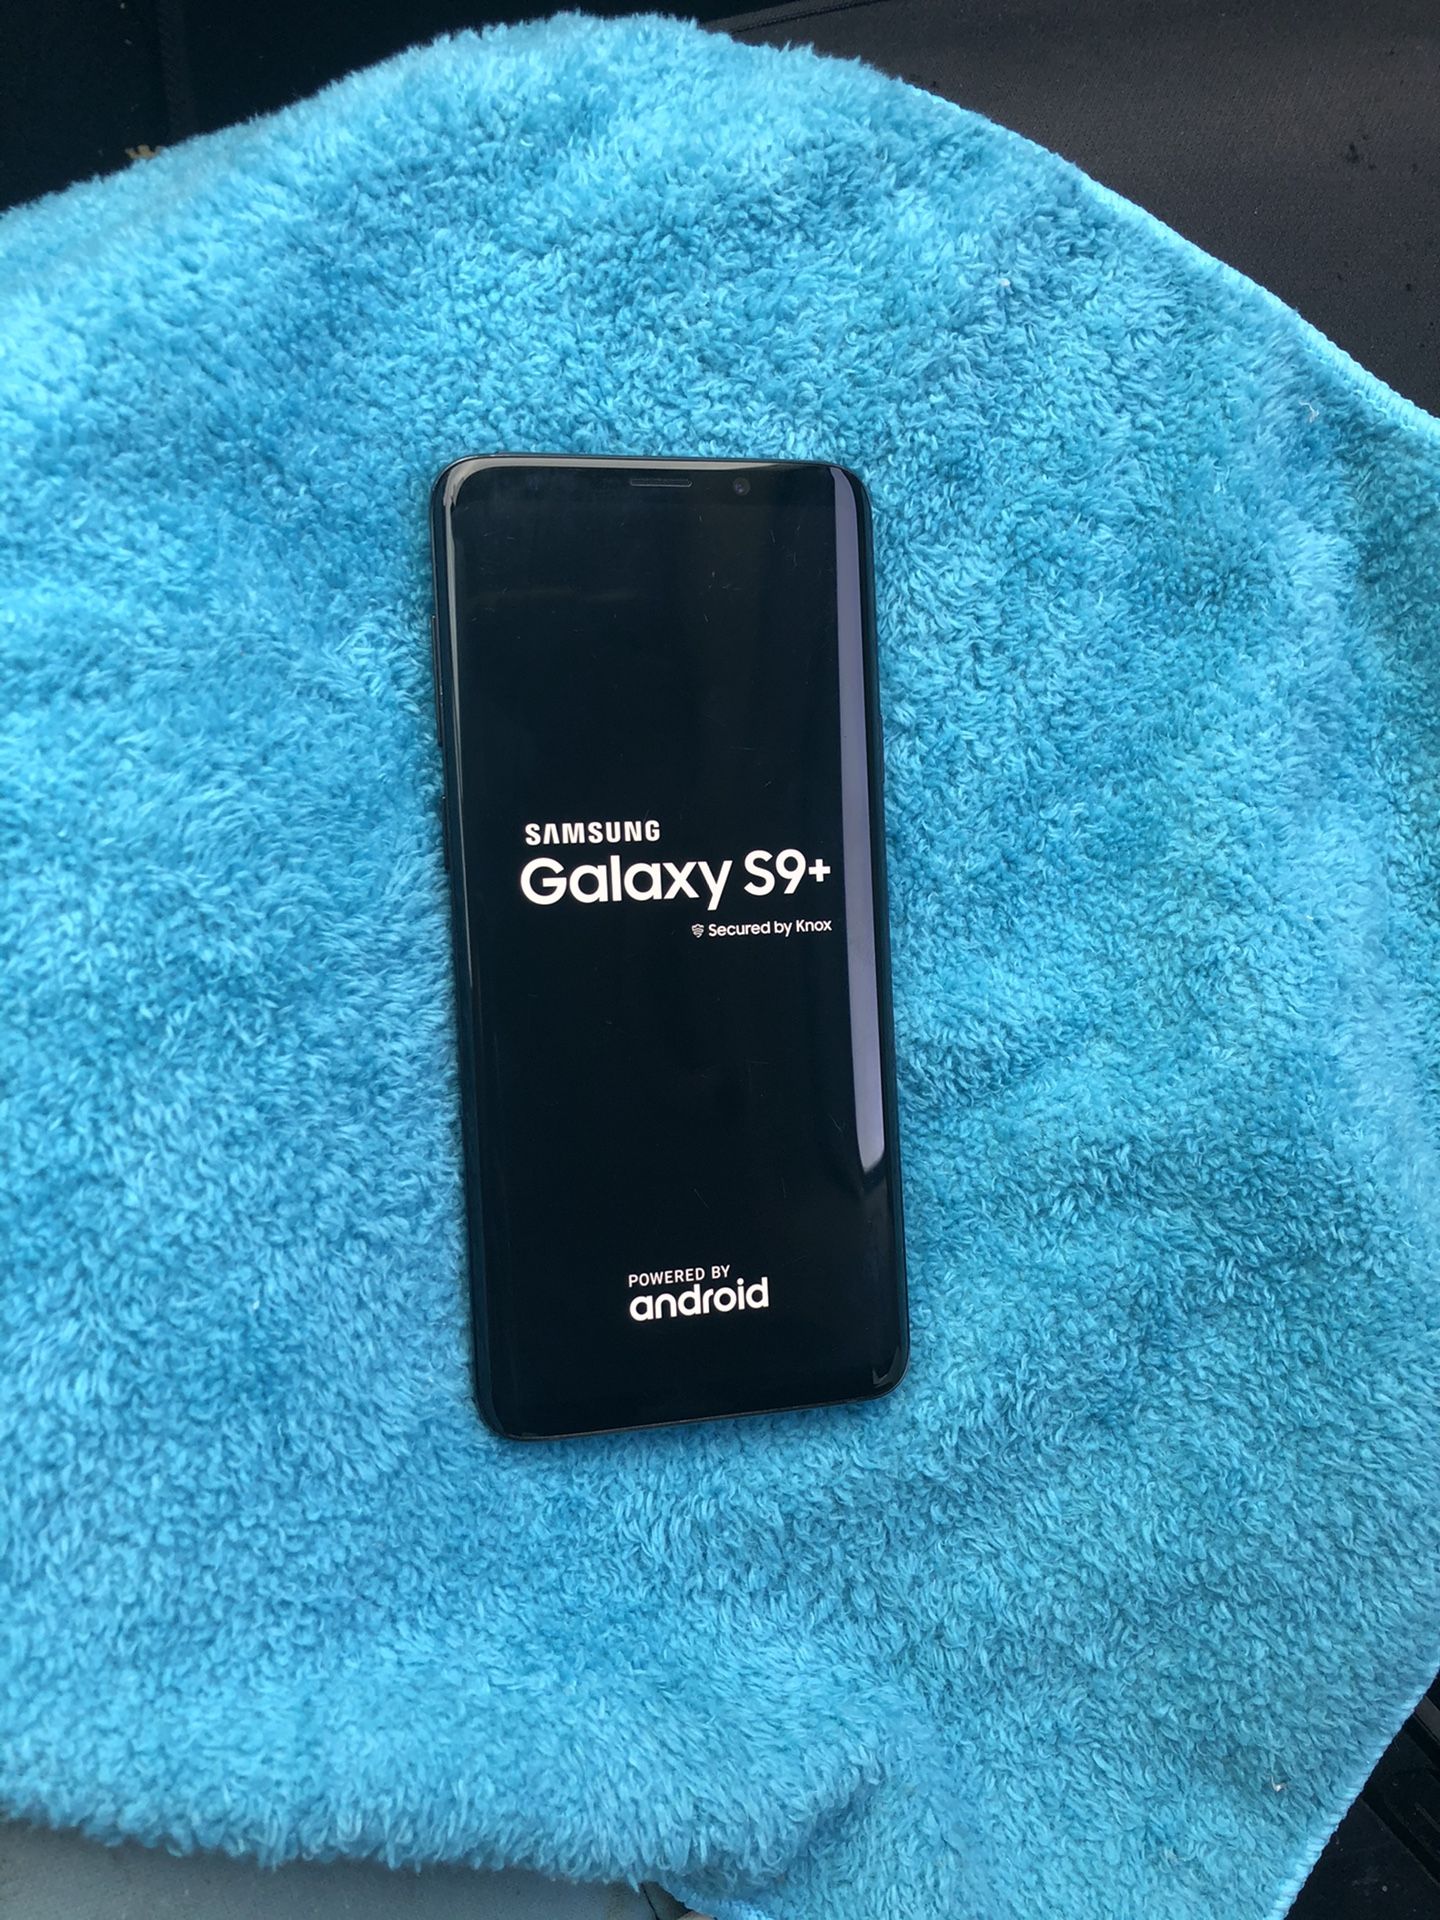 Samsung Galaxy s9+ unlocked for any company T-Mobile metro cricket AT&T Verizon sprint boost mobile Mexico overseas